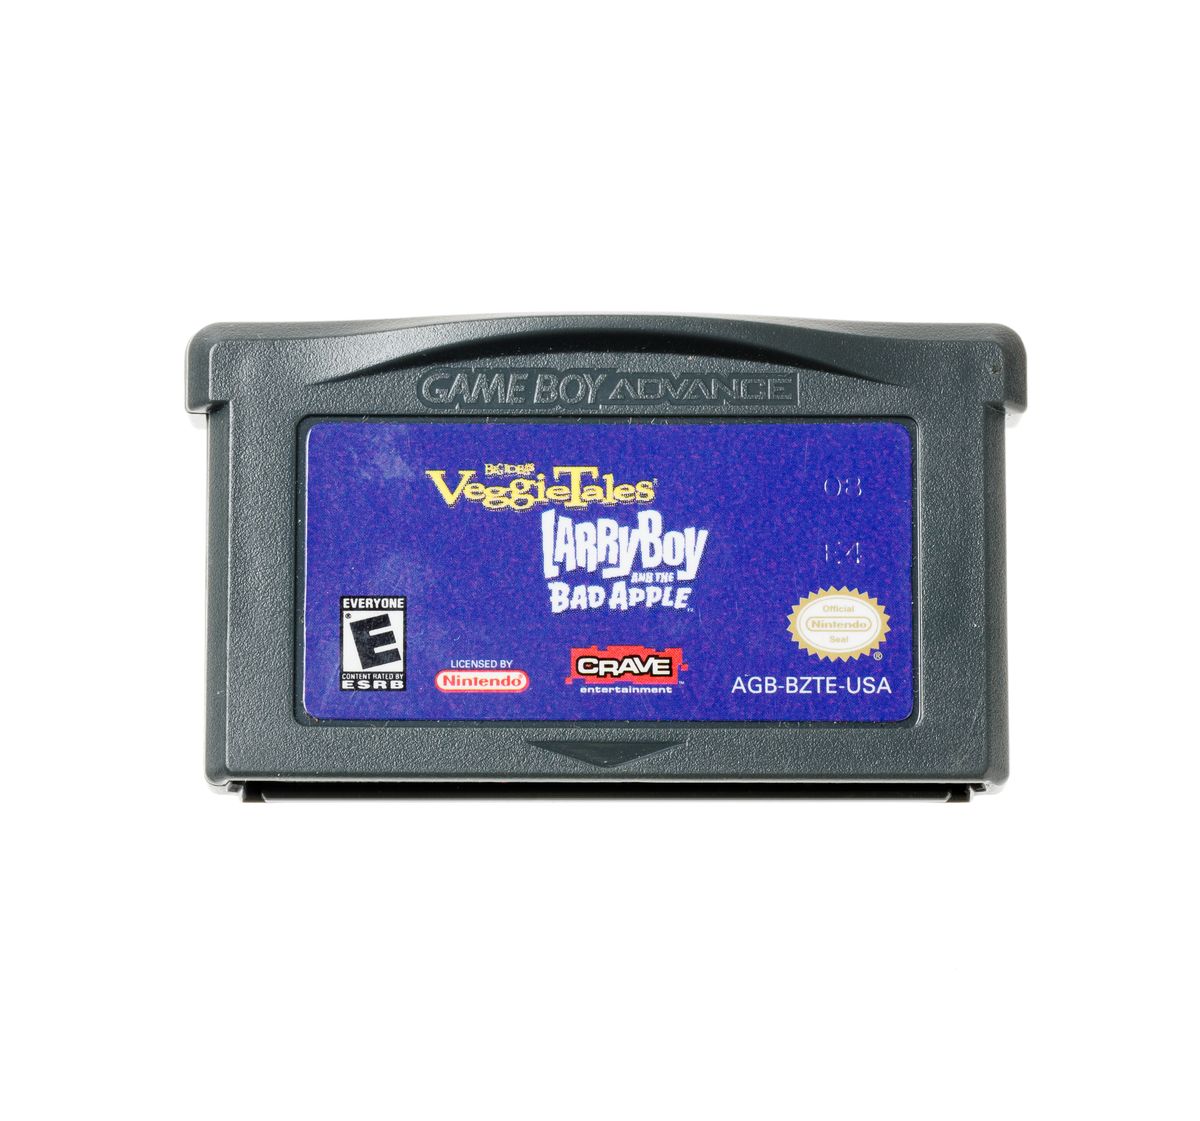 VeggieTales LarryBoy and the Bad Apple - Gameboy Advance Games